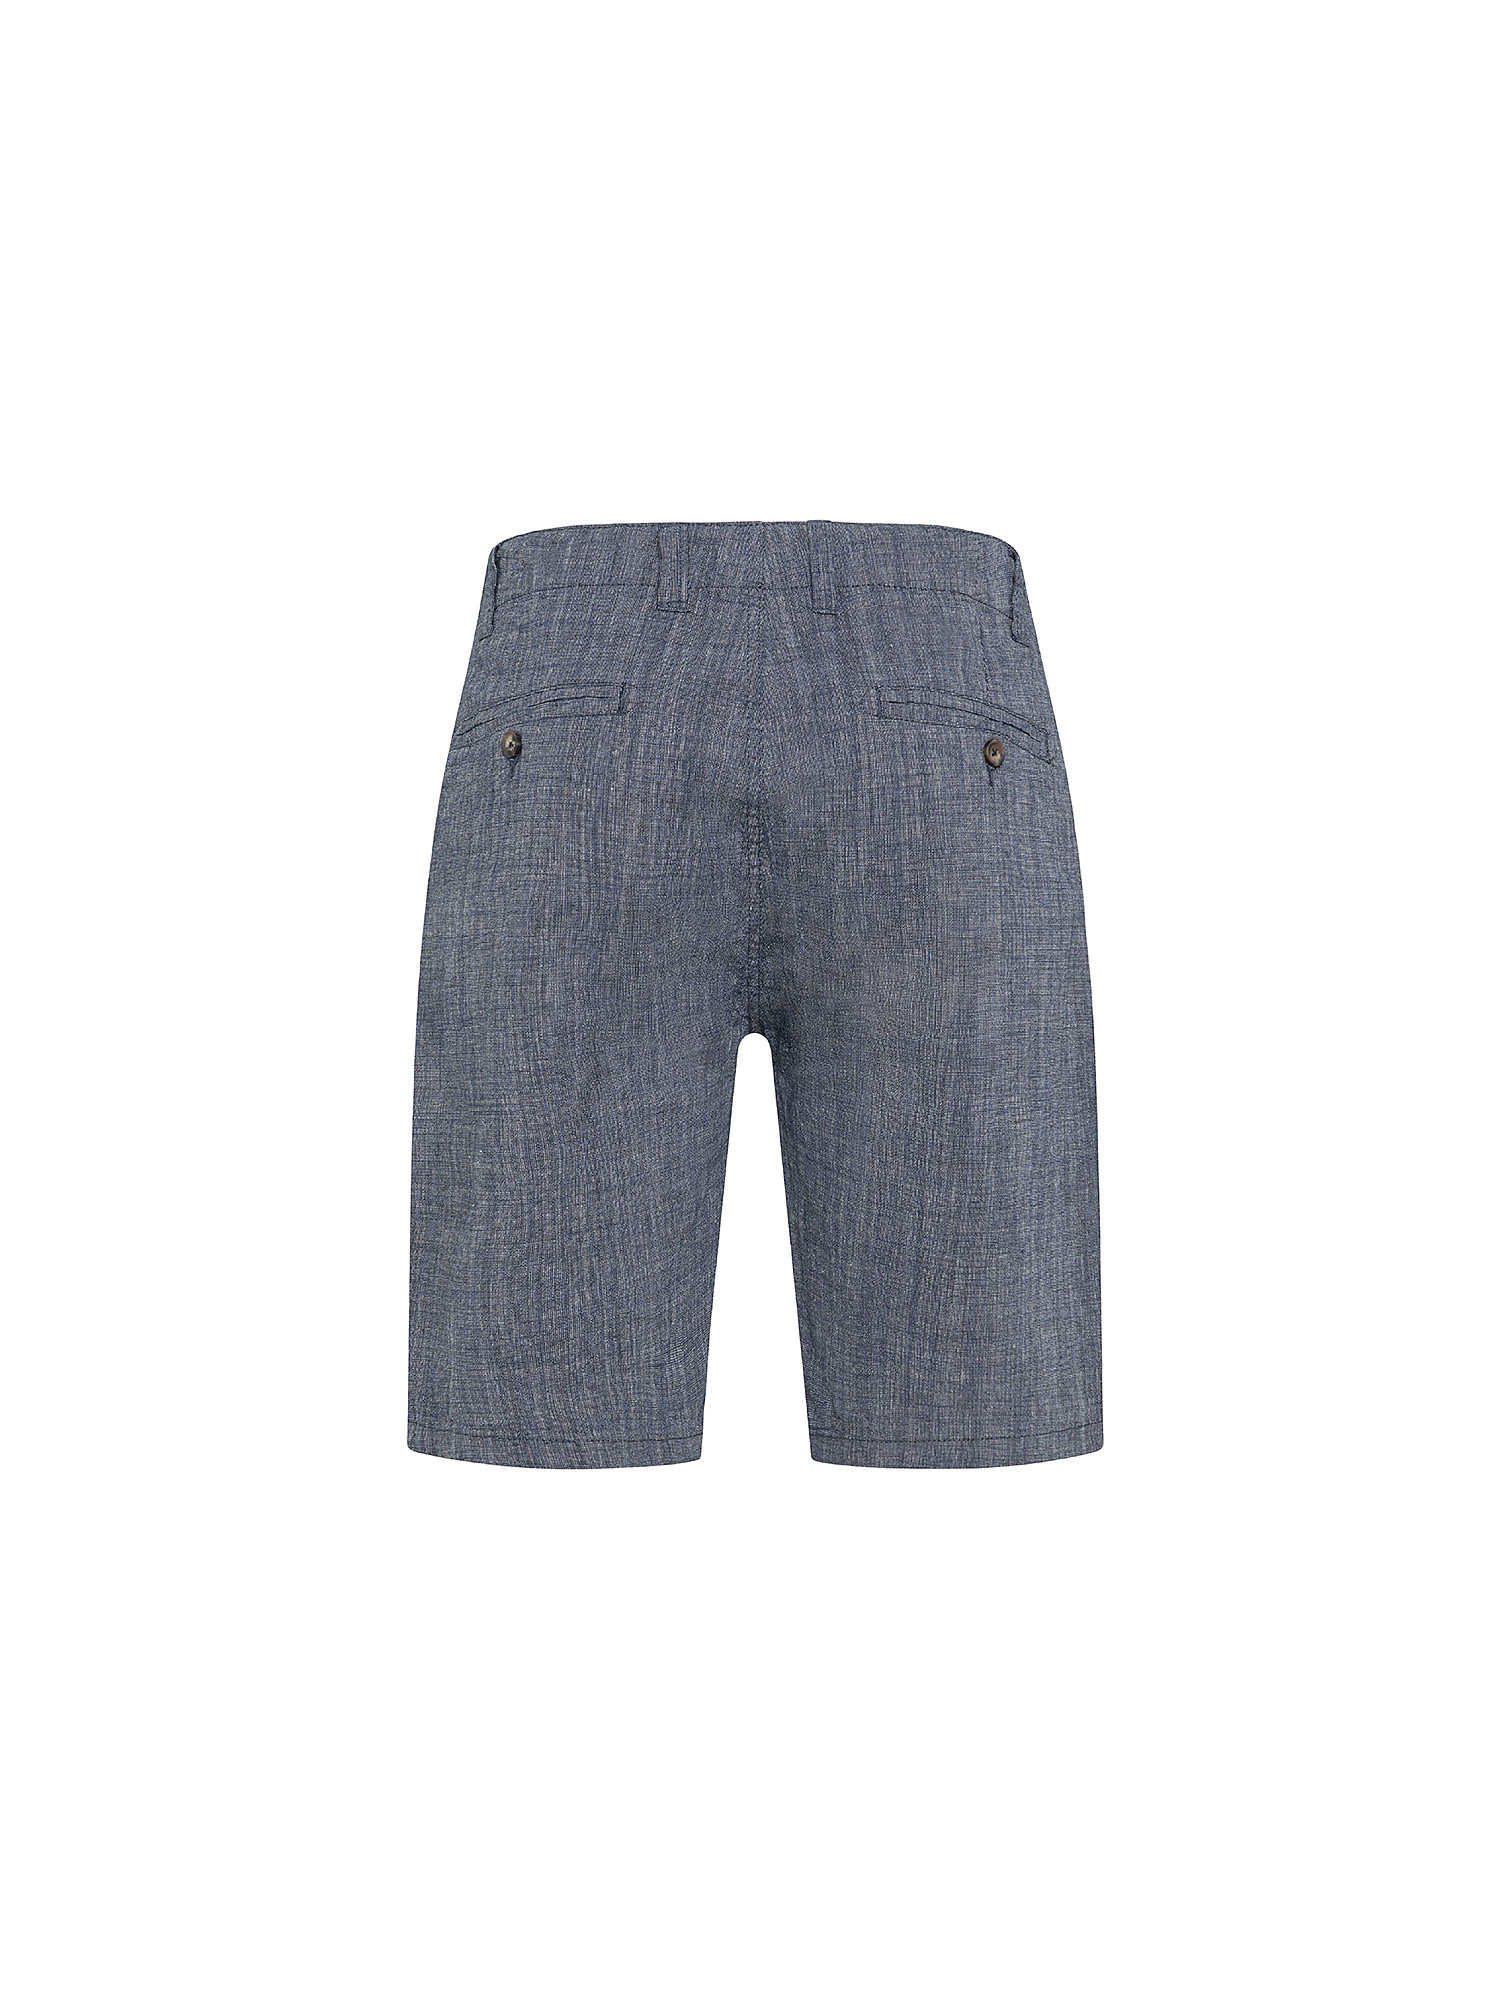 JCT - Chino bermuda in pure cotton, Dark Blue, large image number 1